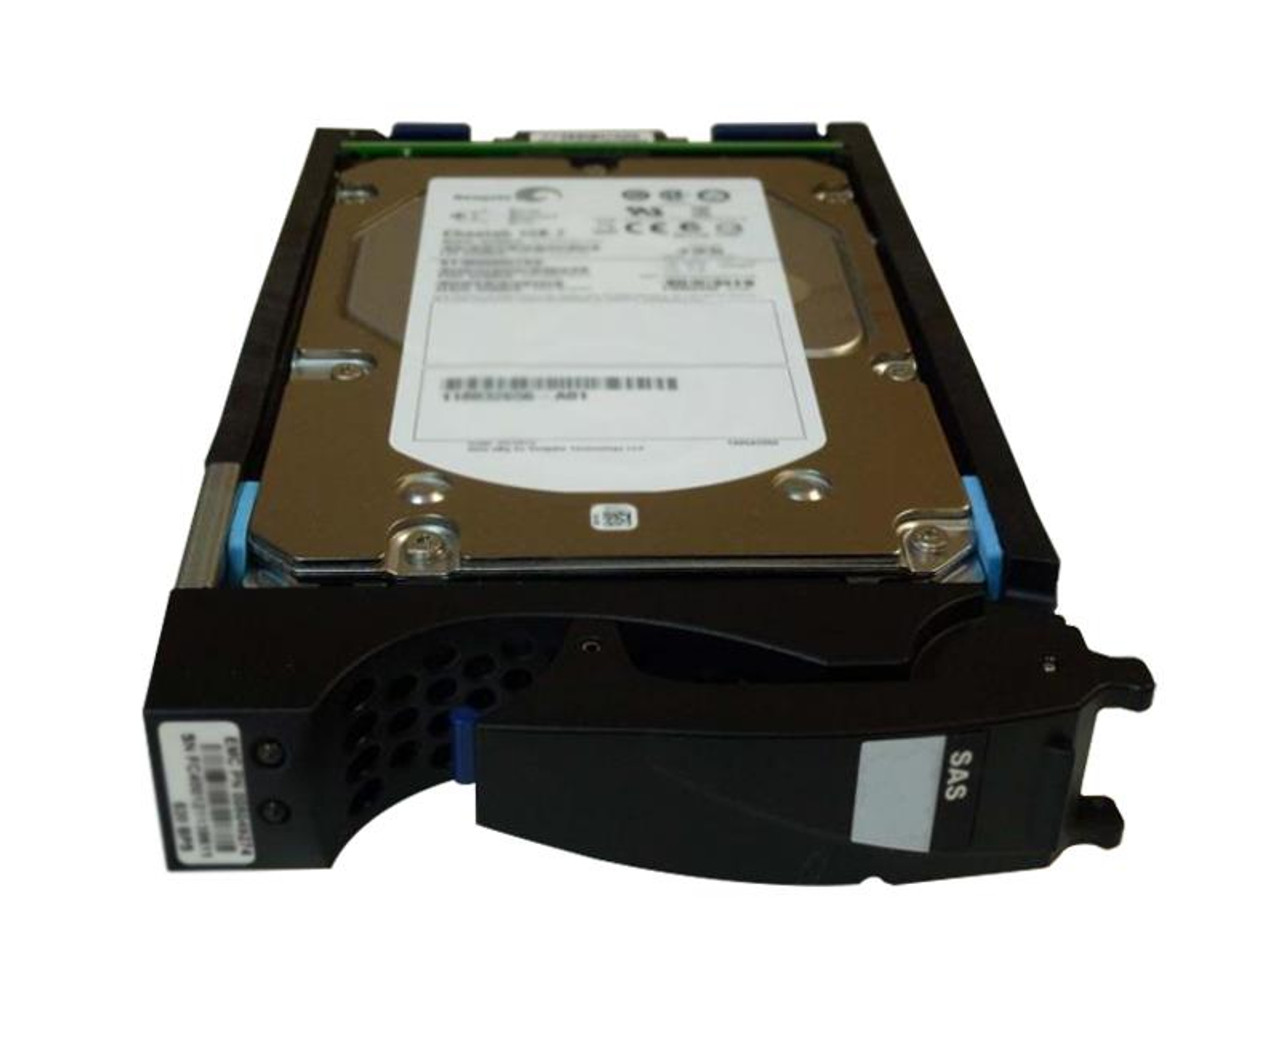 5050220 EMC 450GB 10000RPM Fibre Channel 4Gbps 16MB Cache 3.5-inch Internal Hard Drive for CLARiiON CX4 Series Storage Systems